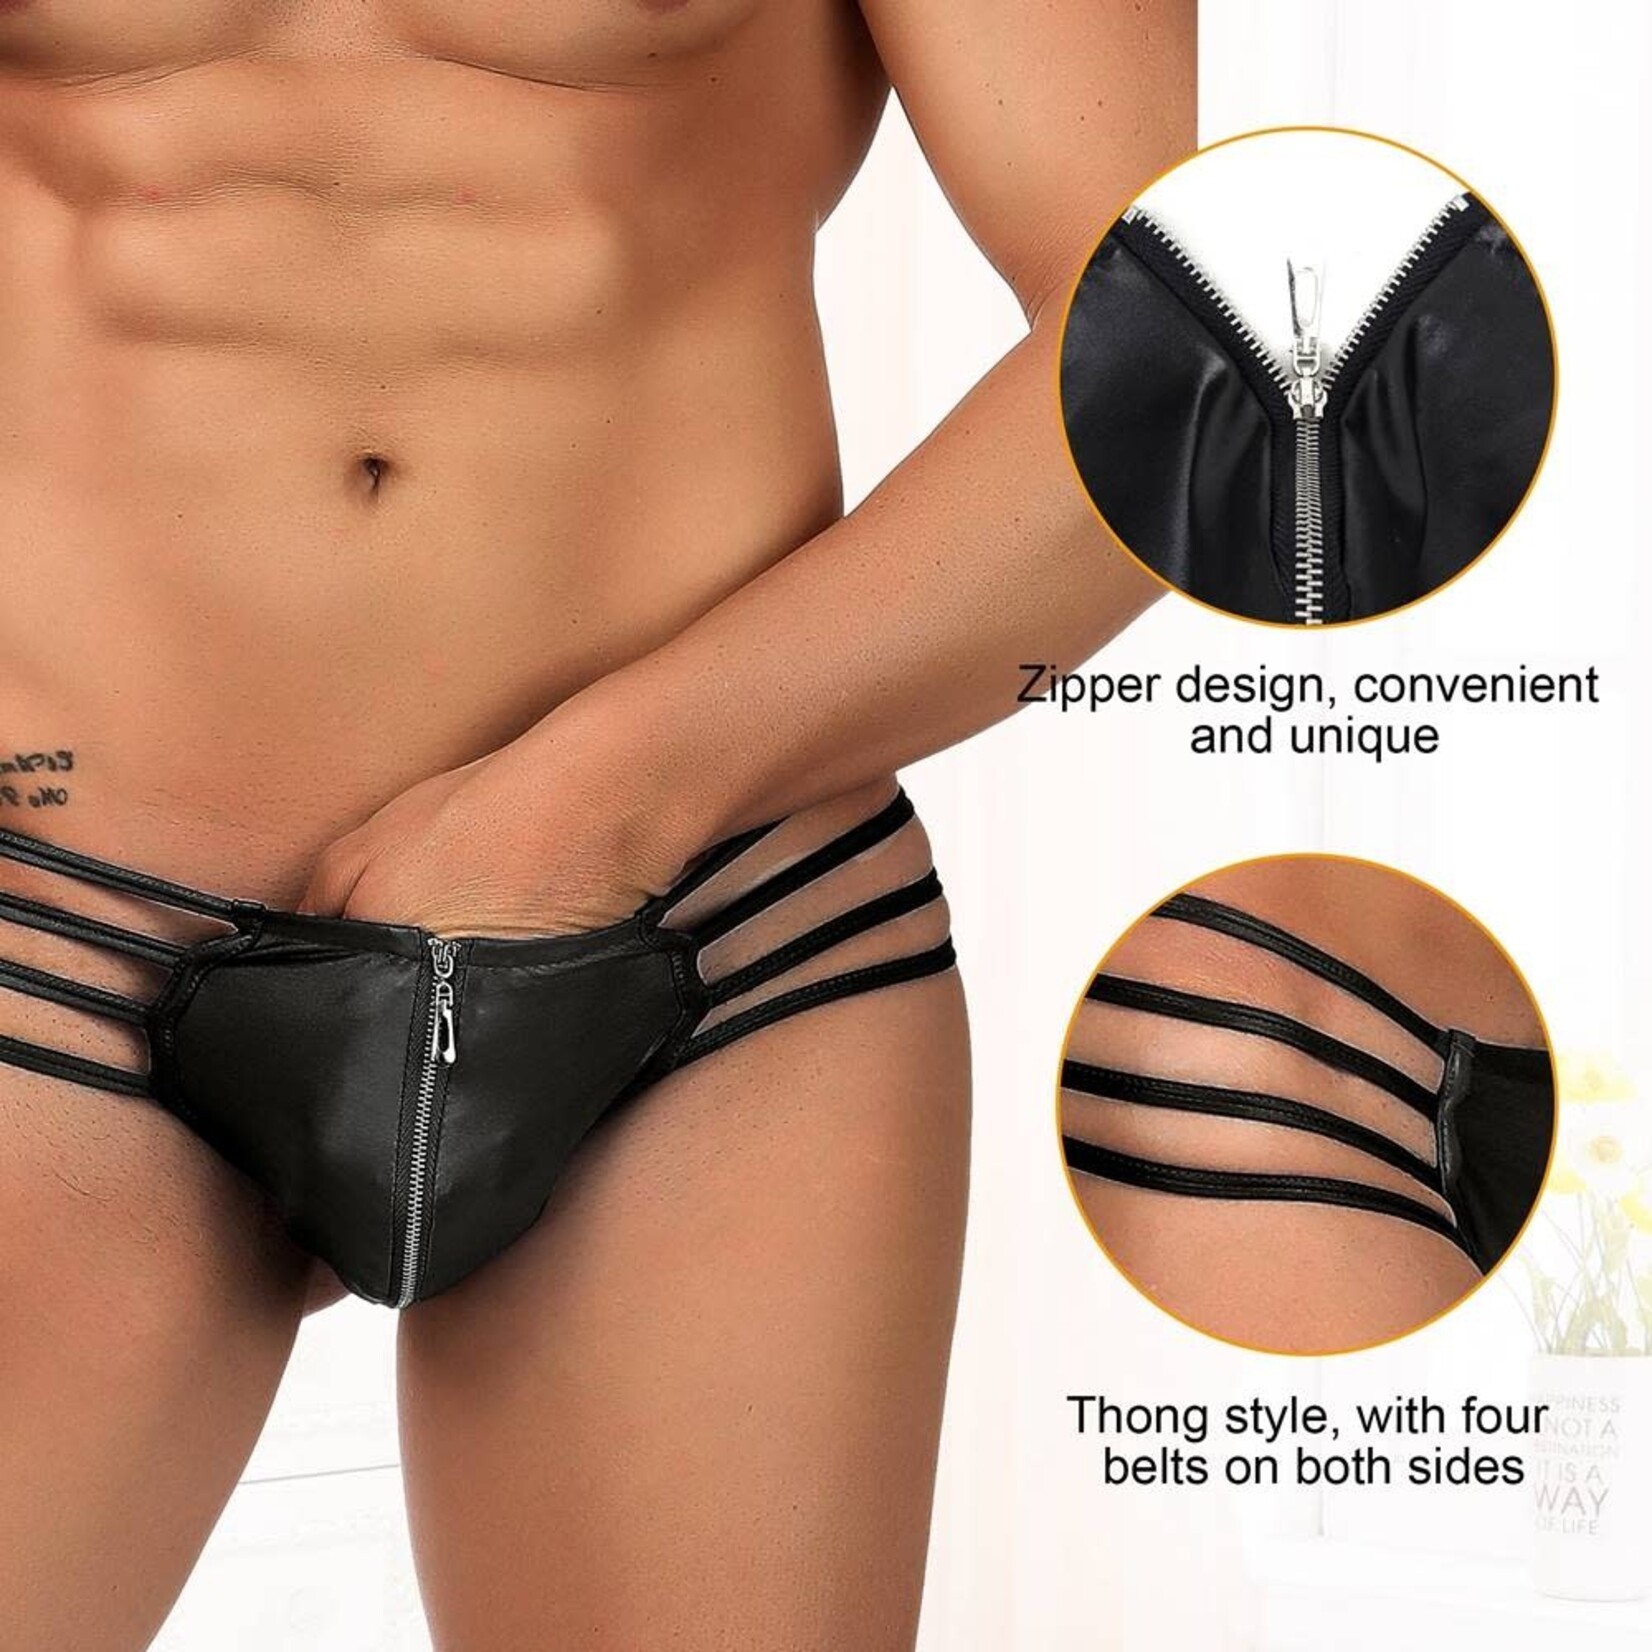 OH YEAH! -  MENS SYNTHETIC LEATHER SEXY ZIPPER PANTIES S